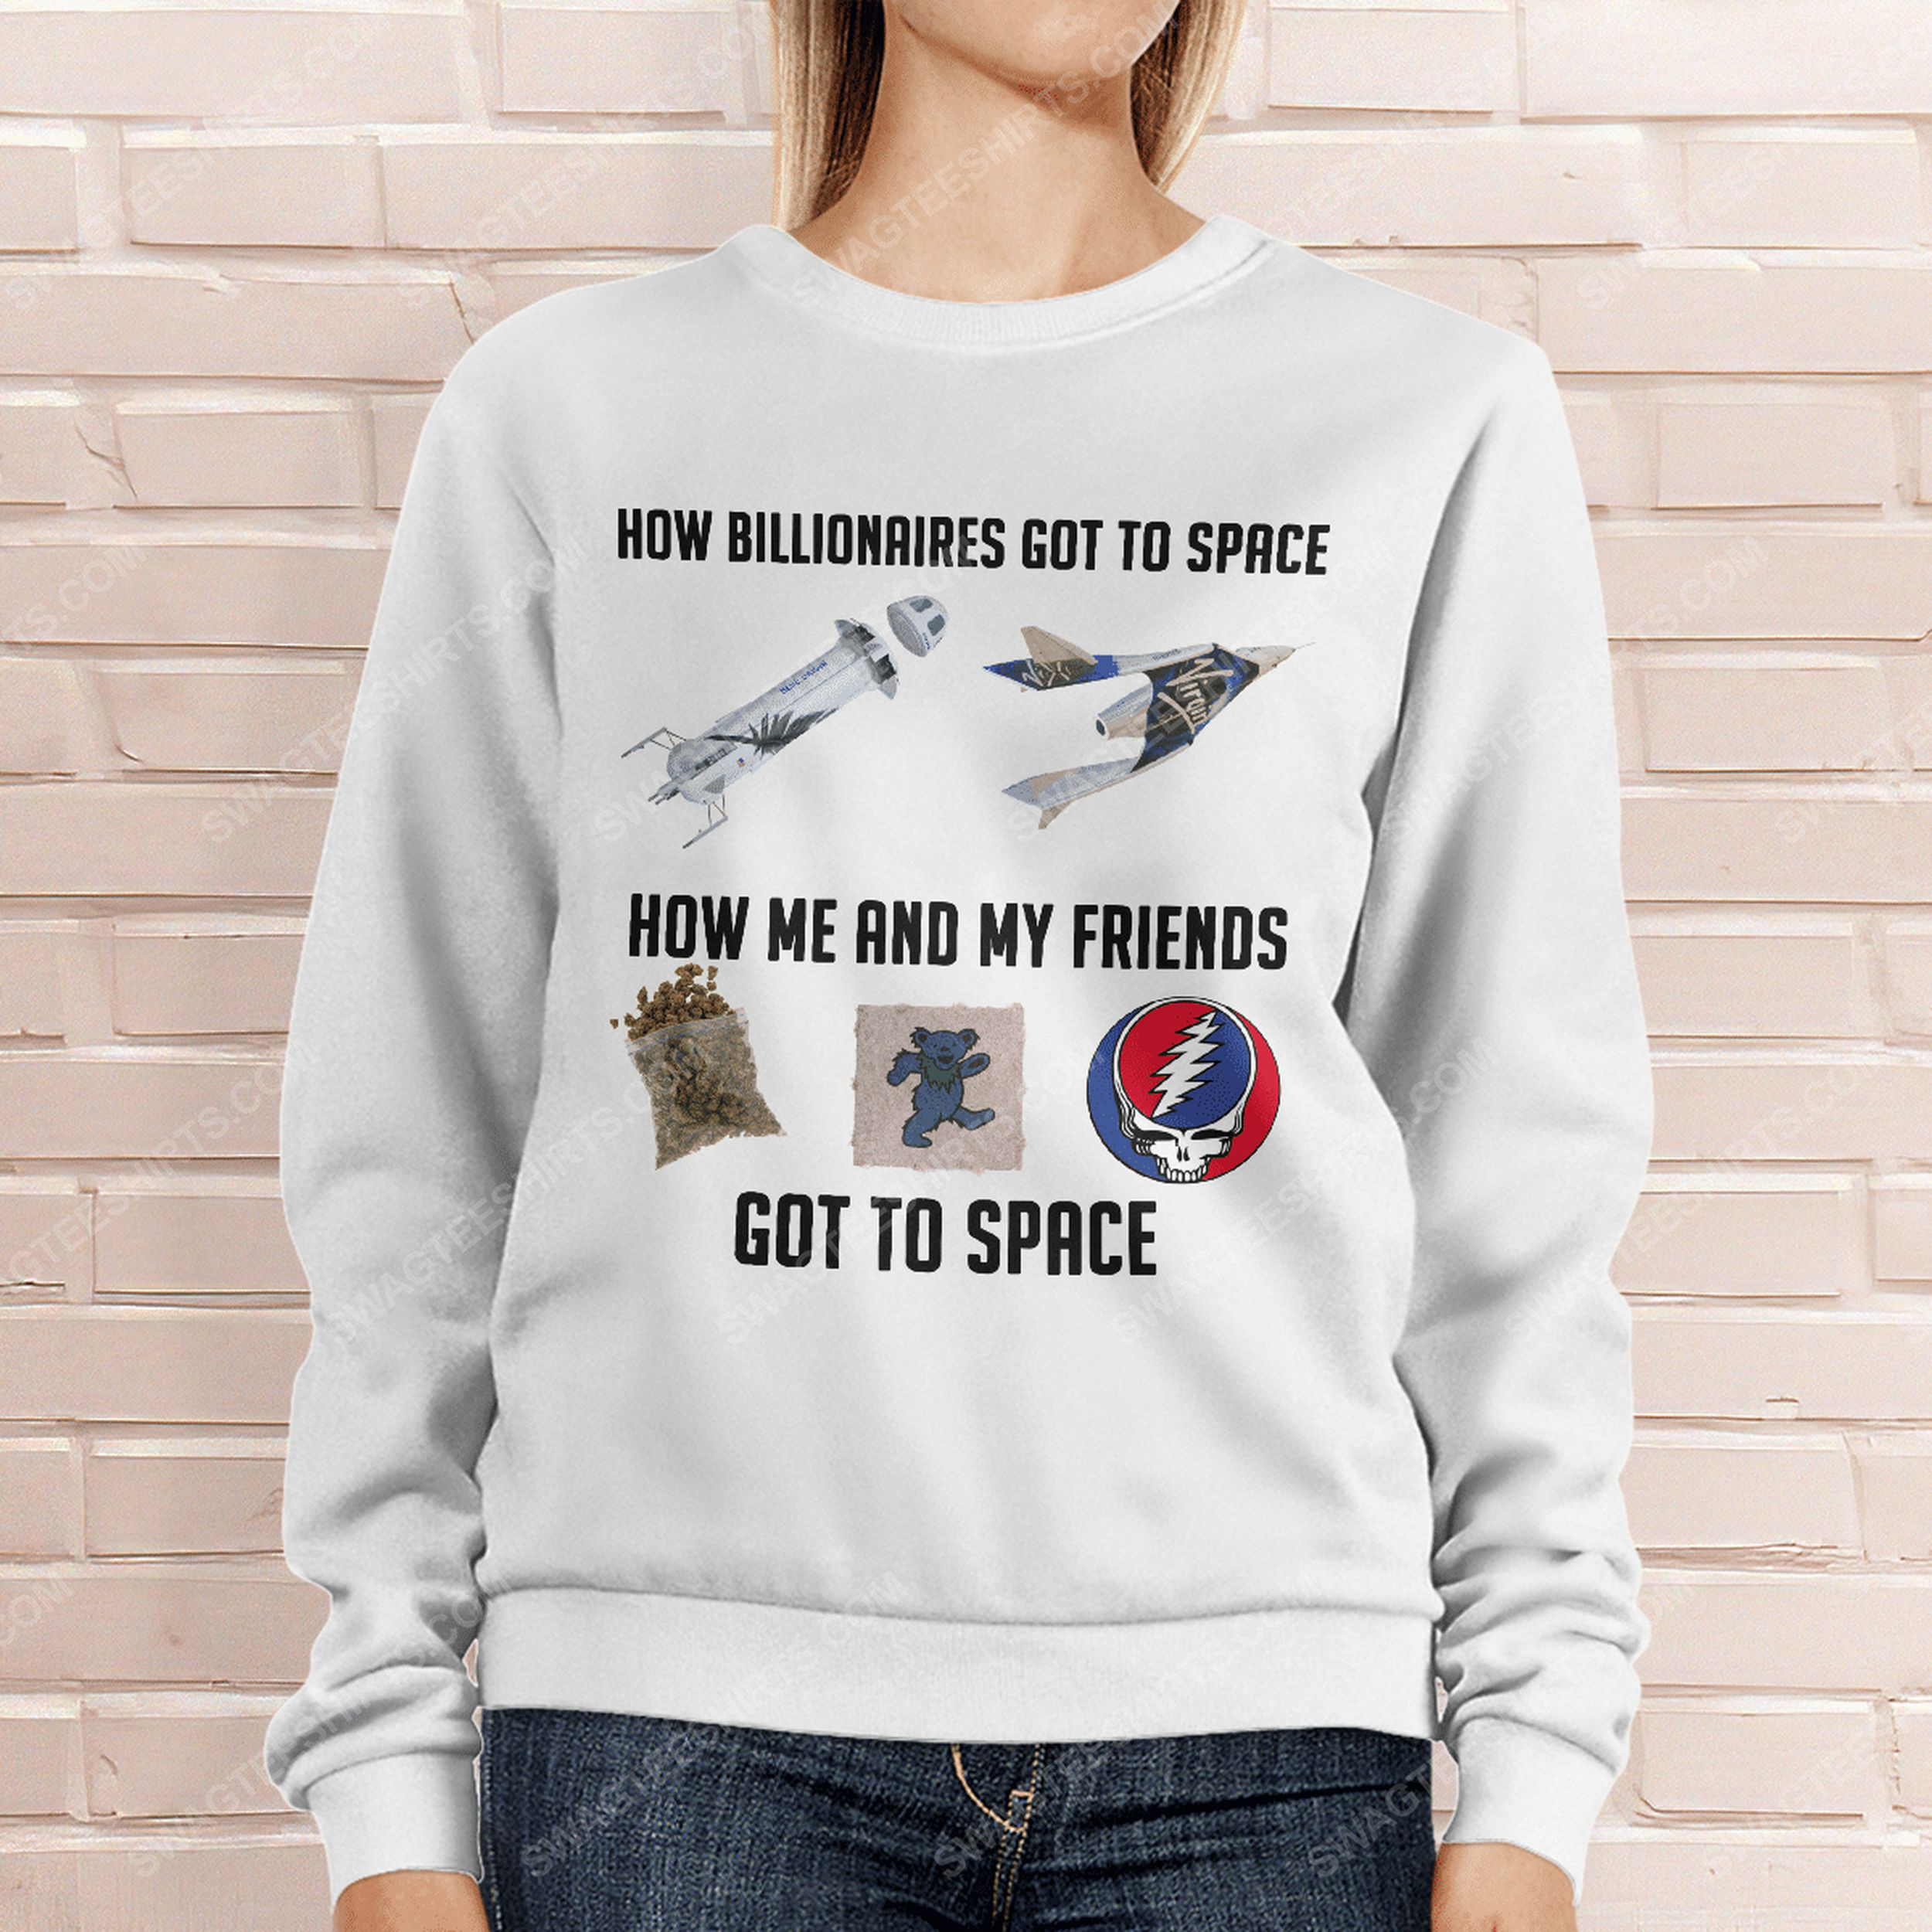 How me and my friends got to space grateful dead sweatshirt 1(1)